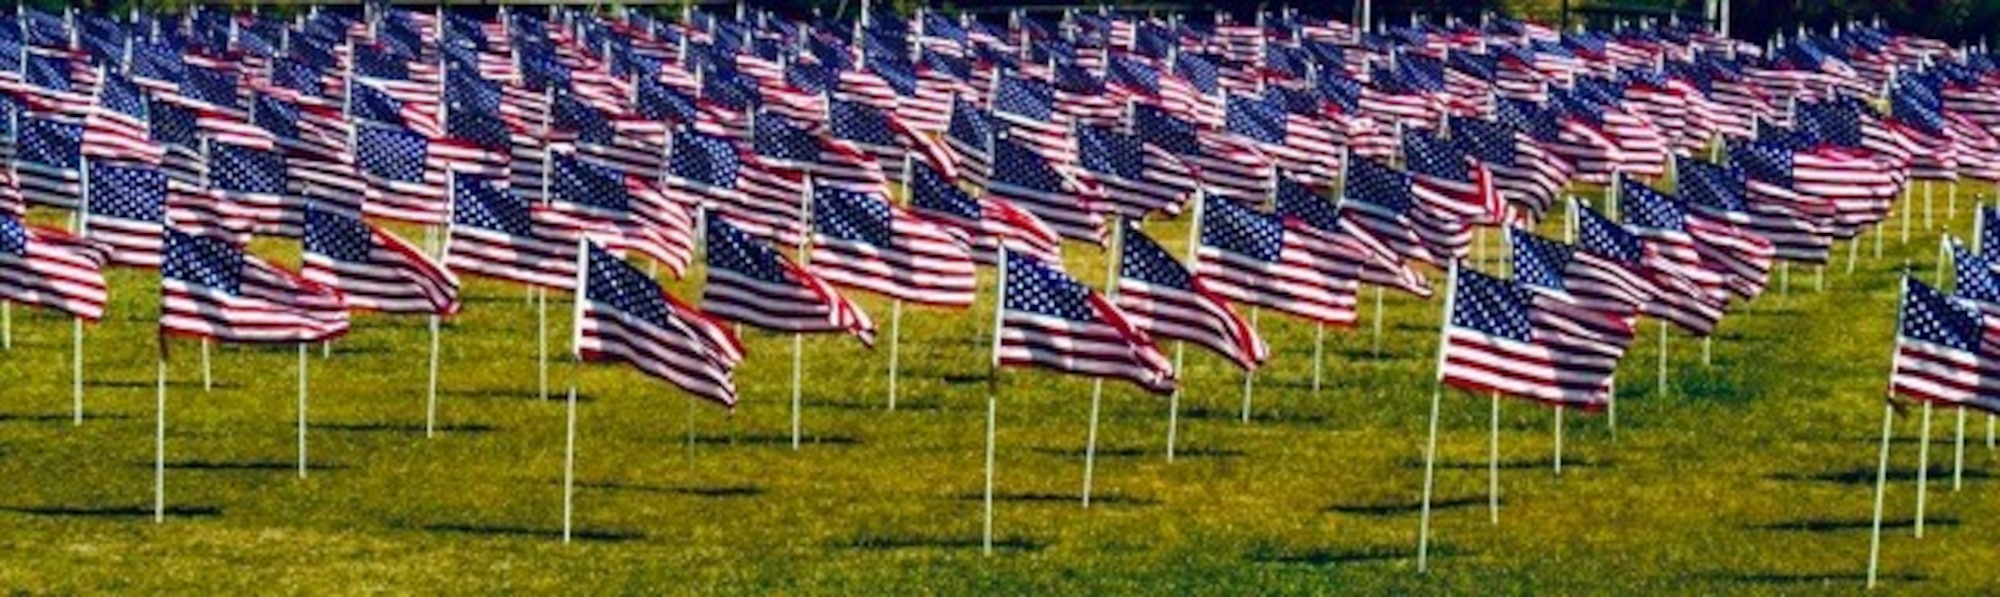 A field of American Flags. (Photo courtesy of Albert Valdez)